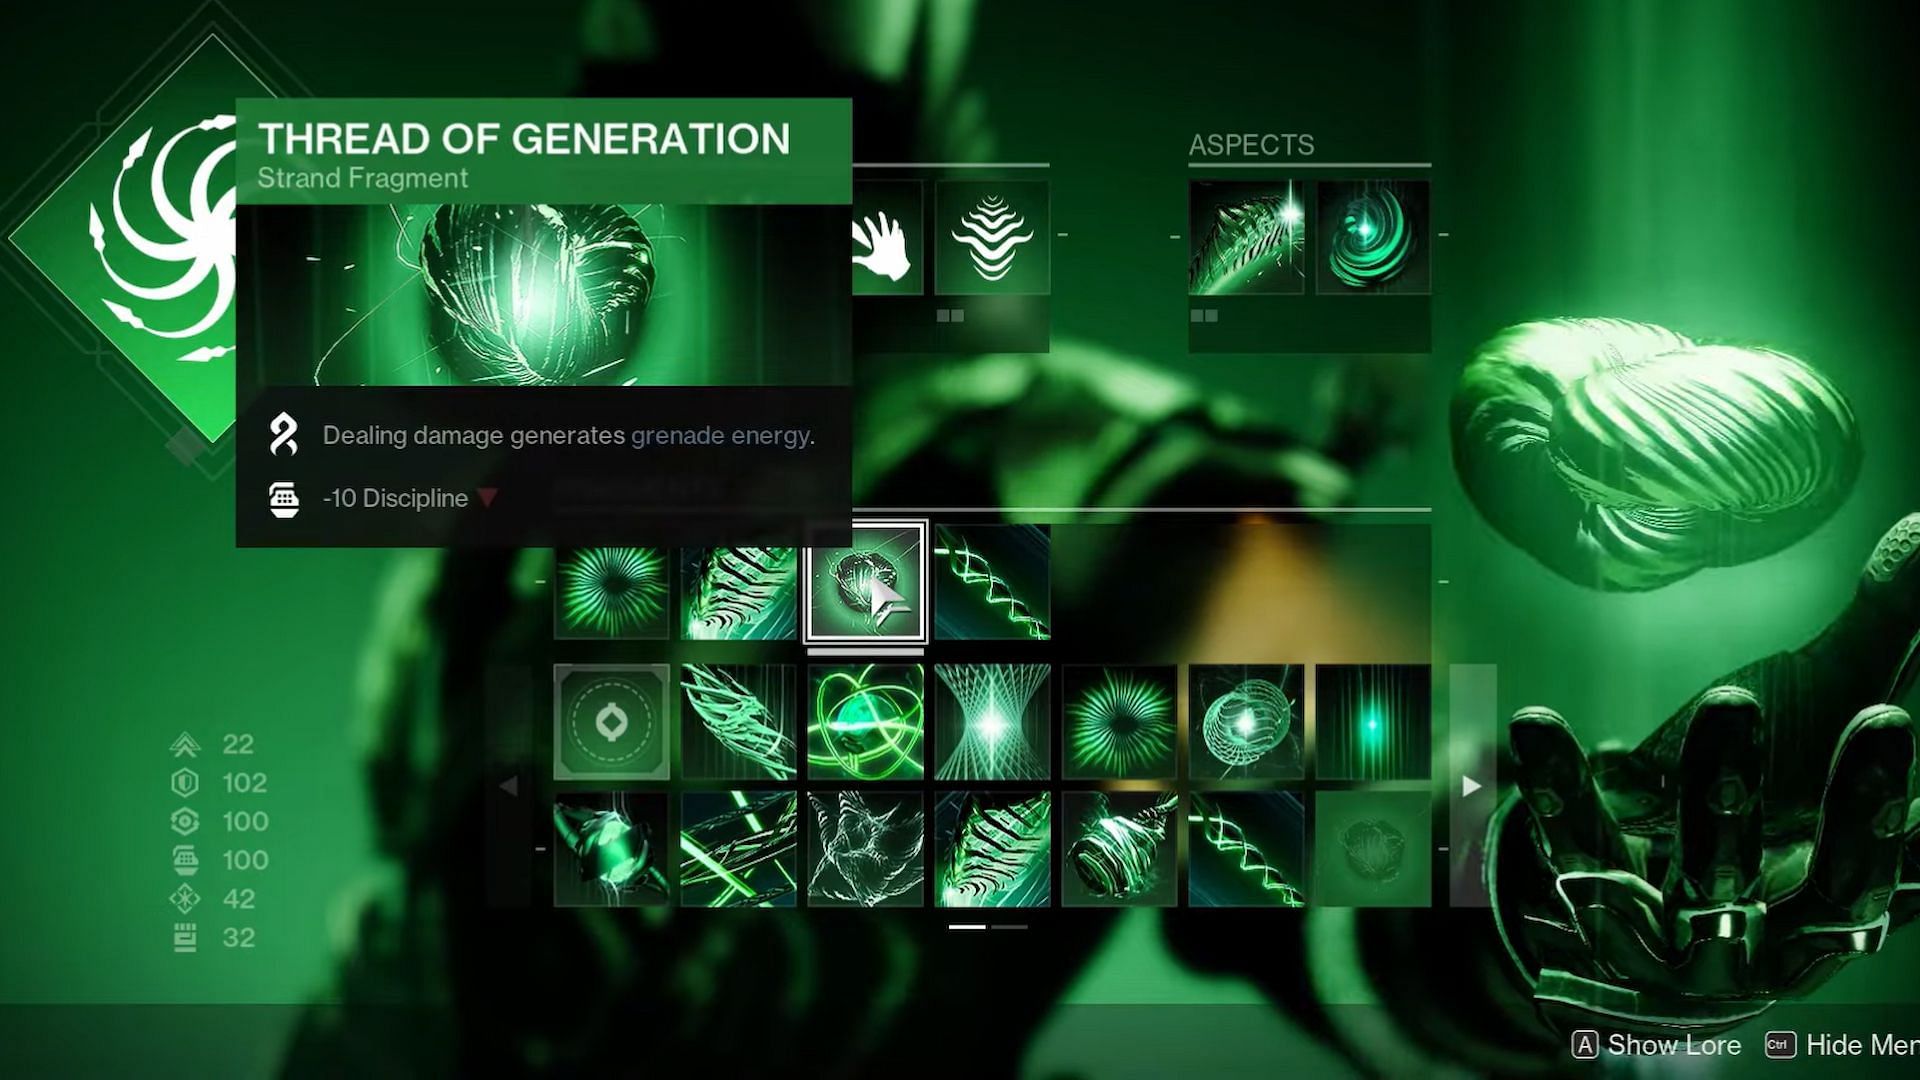 This Fragment helps in generating grenade energy (Image via Destiny 2)